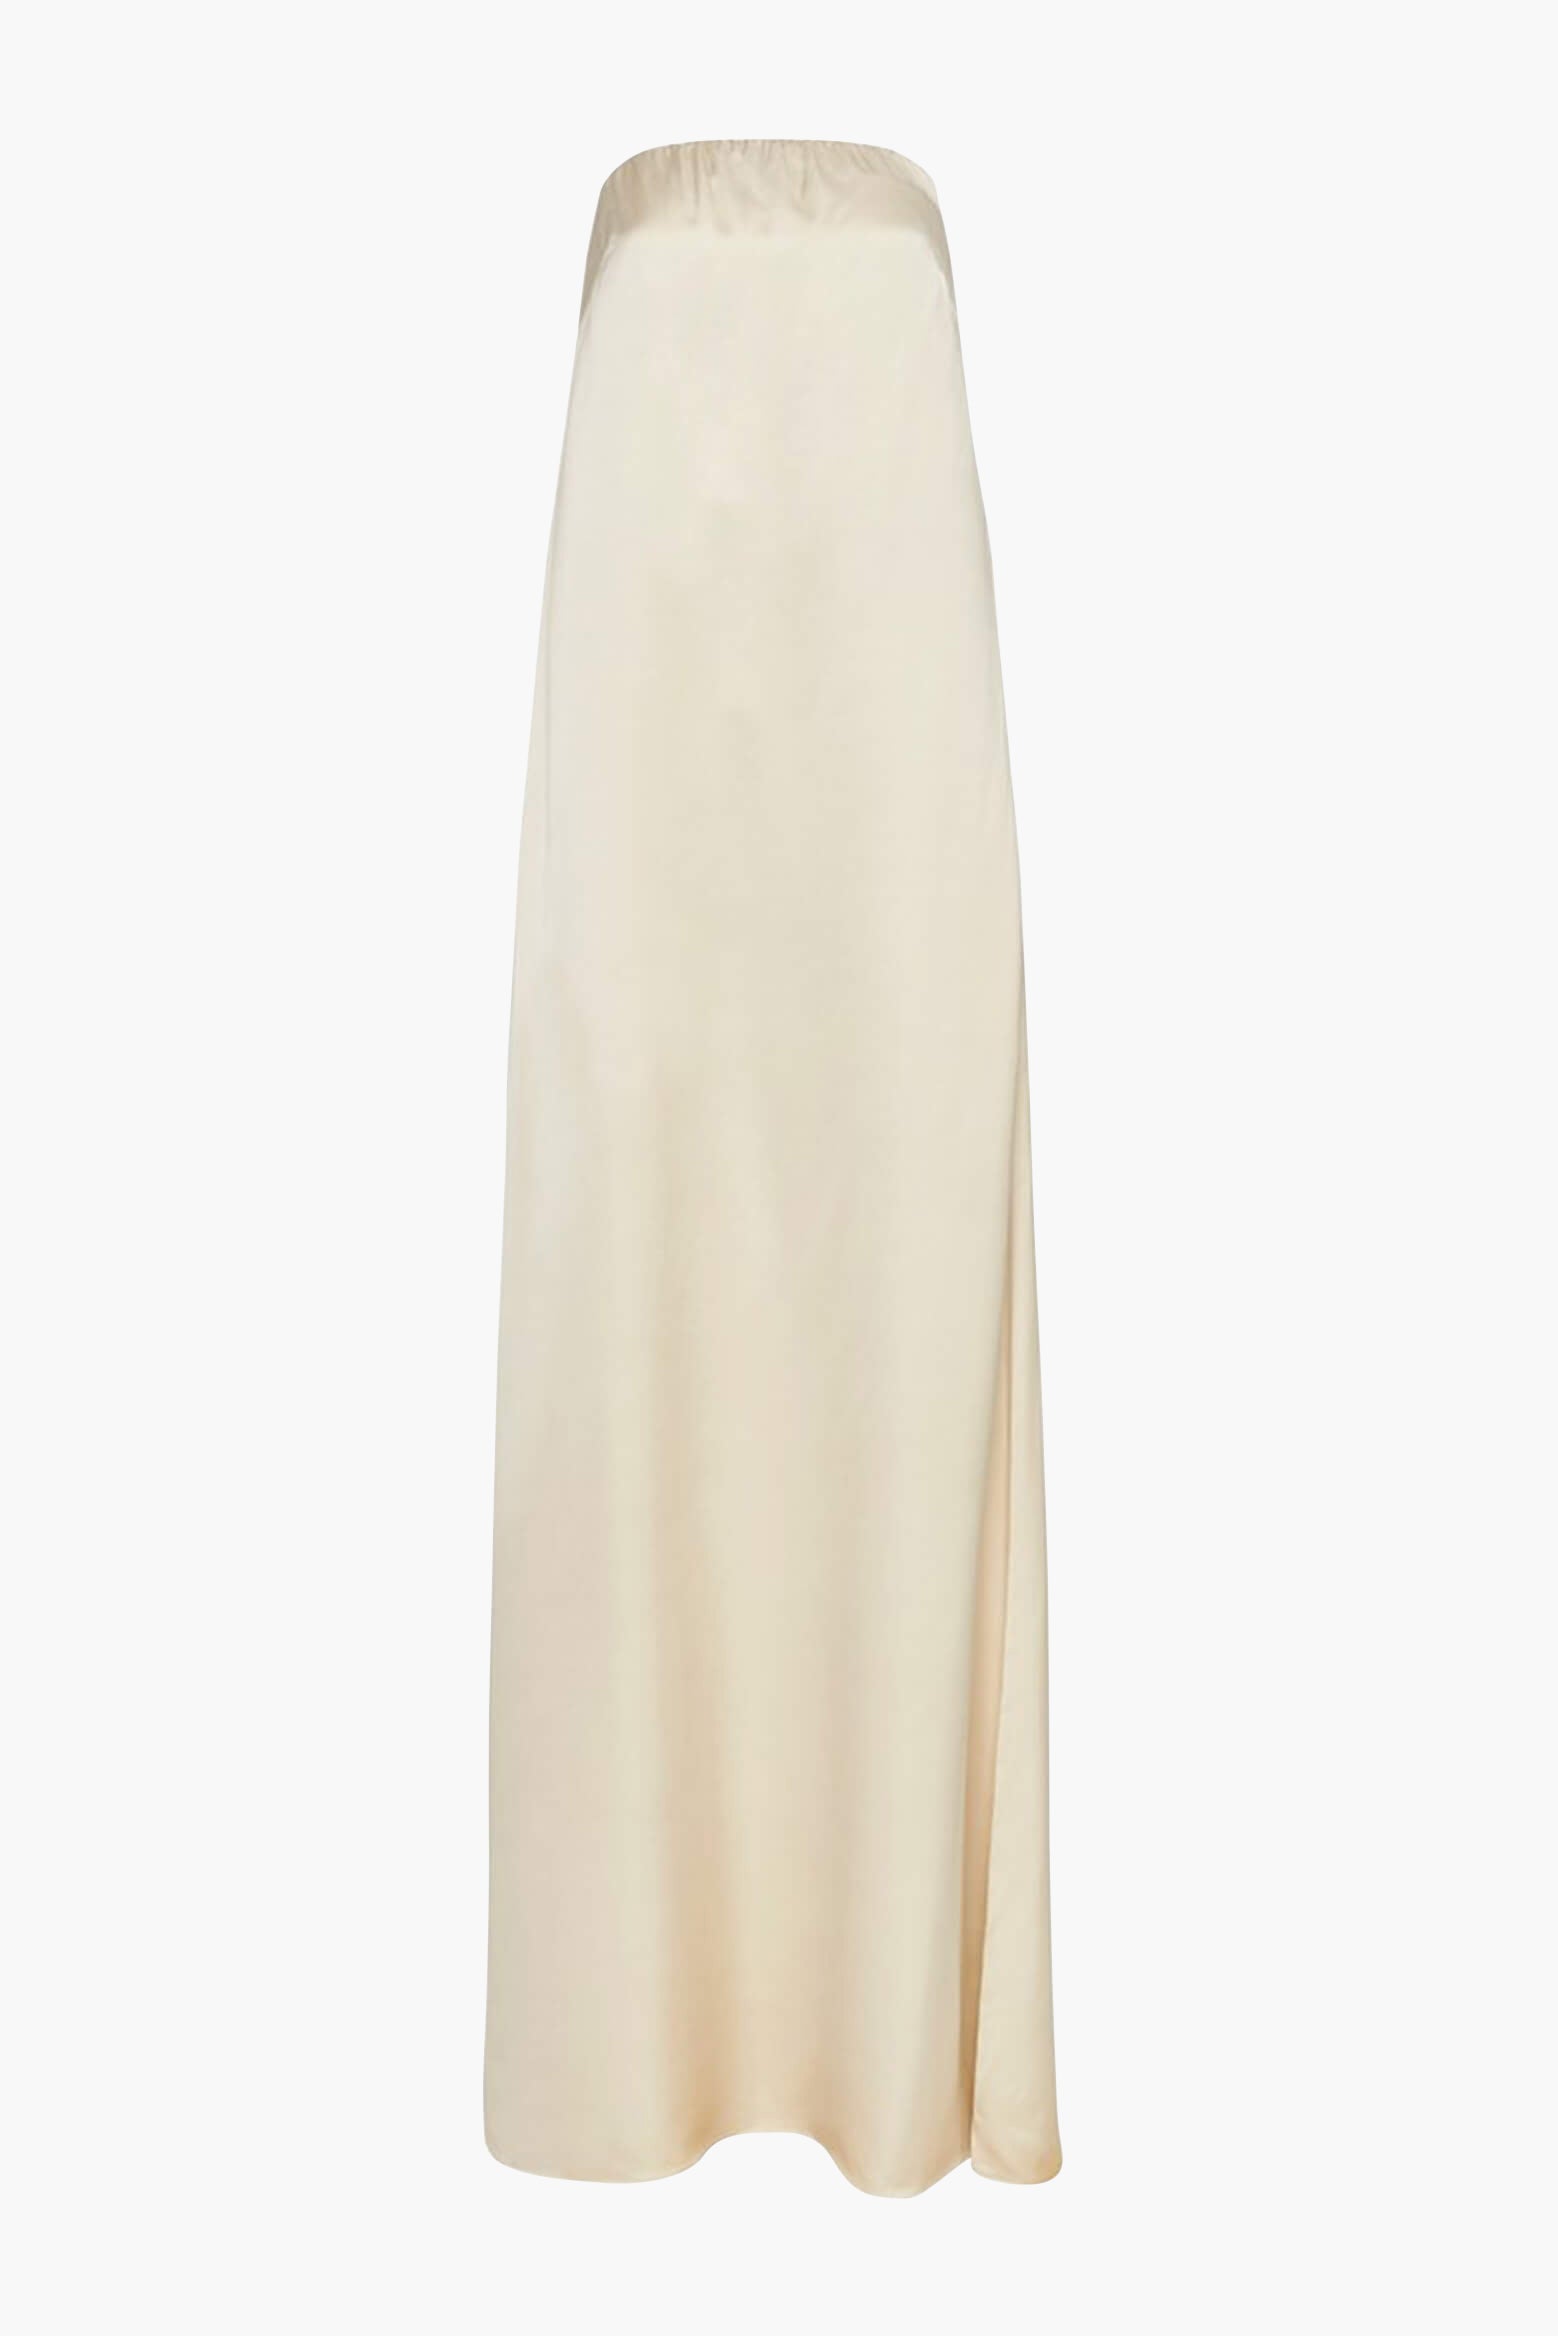 Esse Opia Column Dress in Champagne available at TNT The New Trend